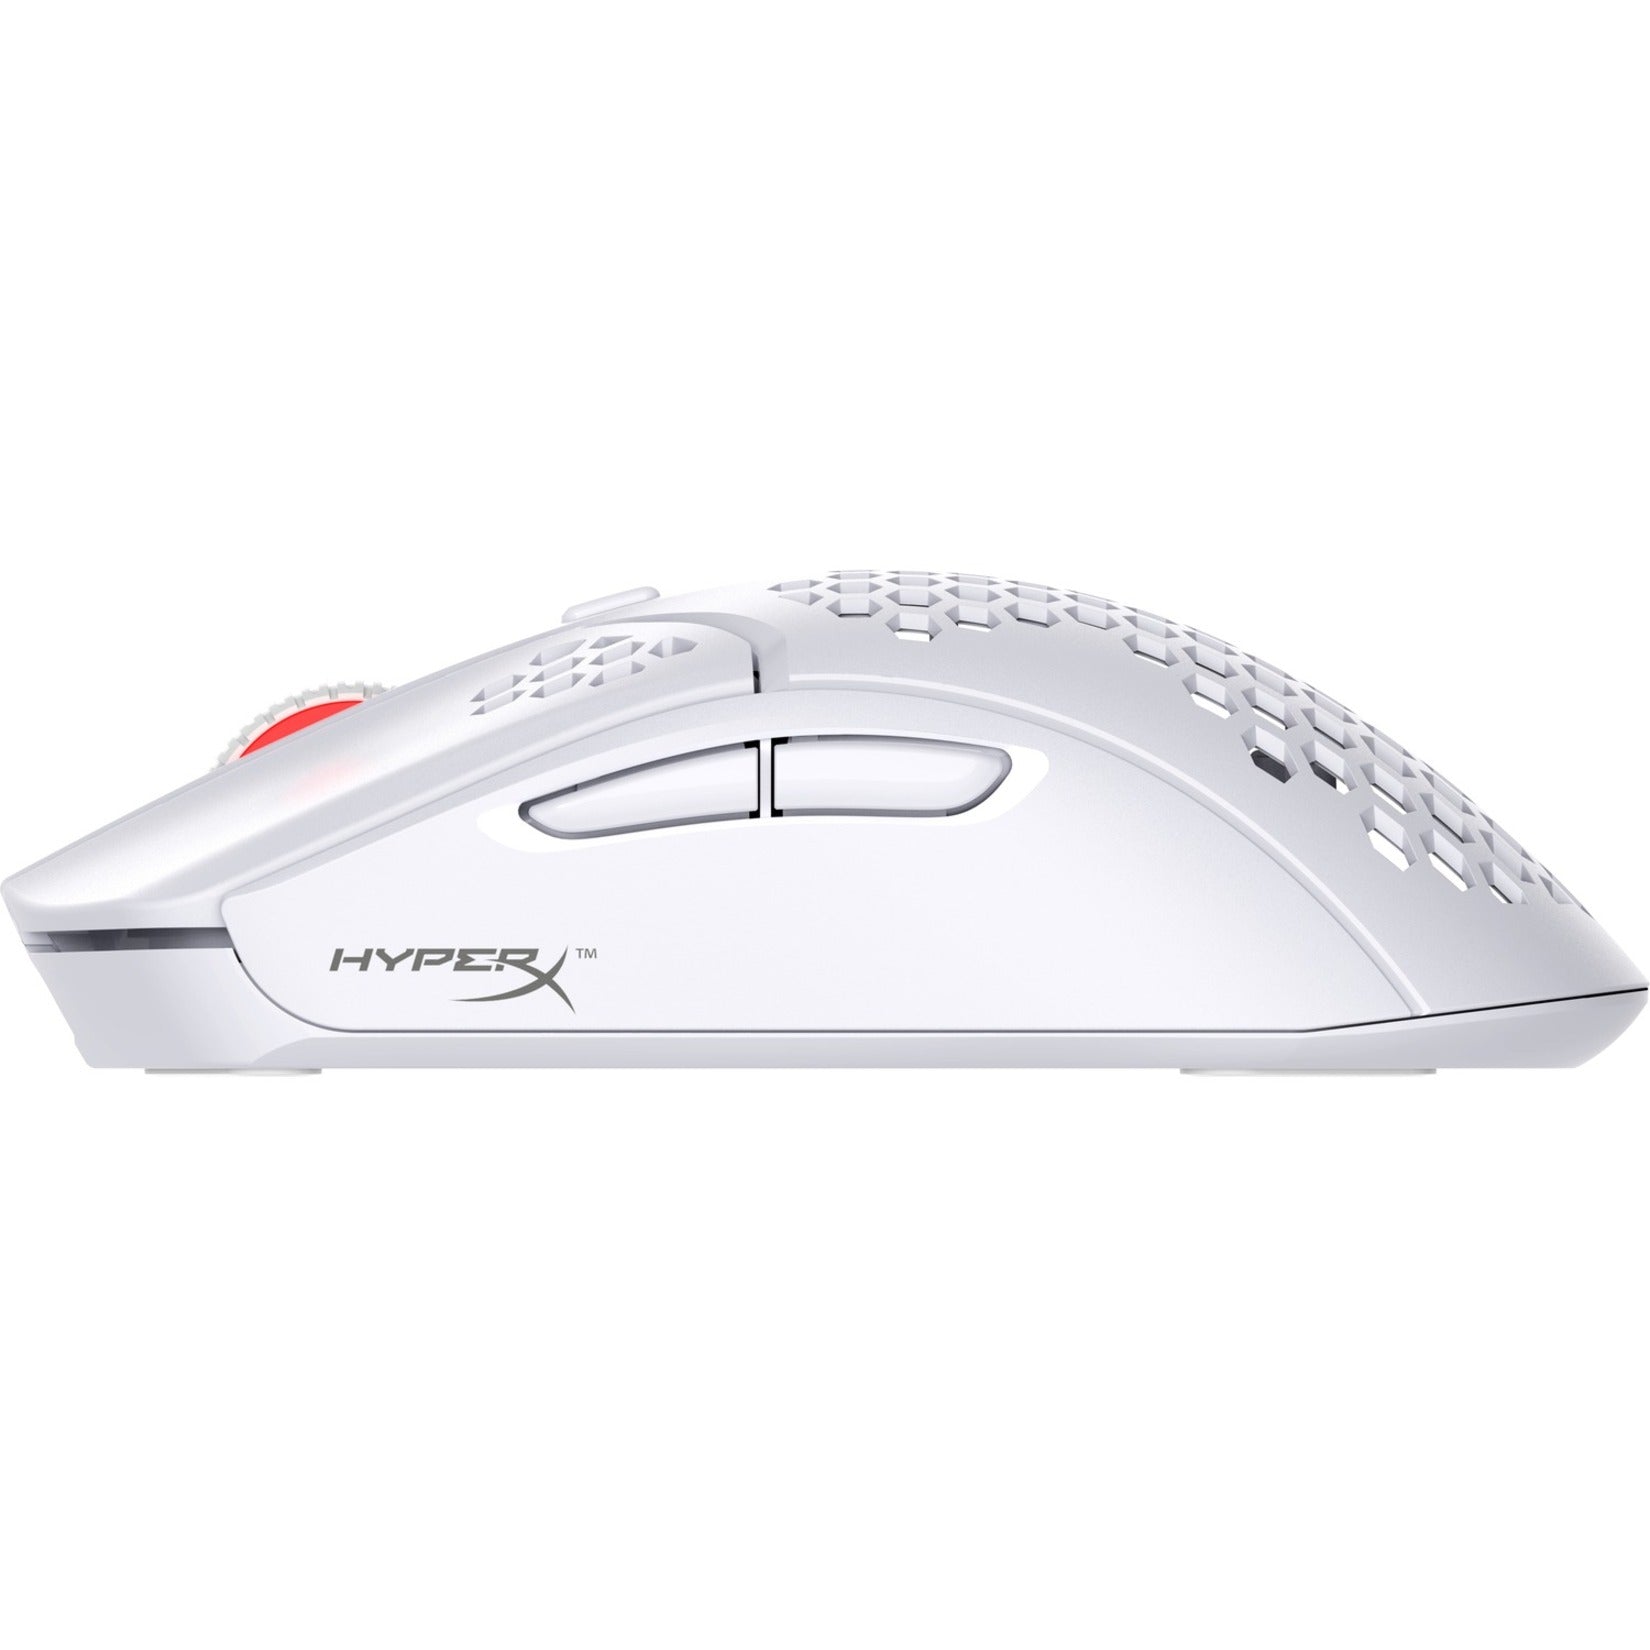 HyperX 4P5D8AA Pulsefire Haste Gaming Mouse, Symmetrical Design, 16000 DPI, Wireless/Cable Connectivity